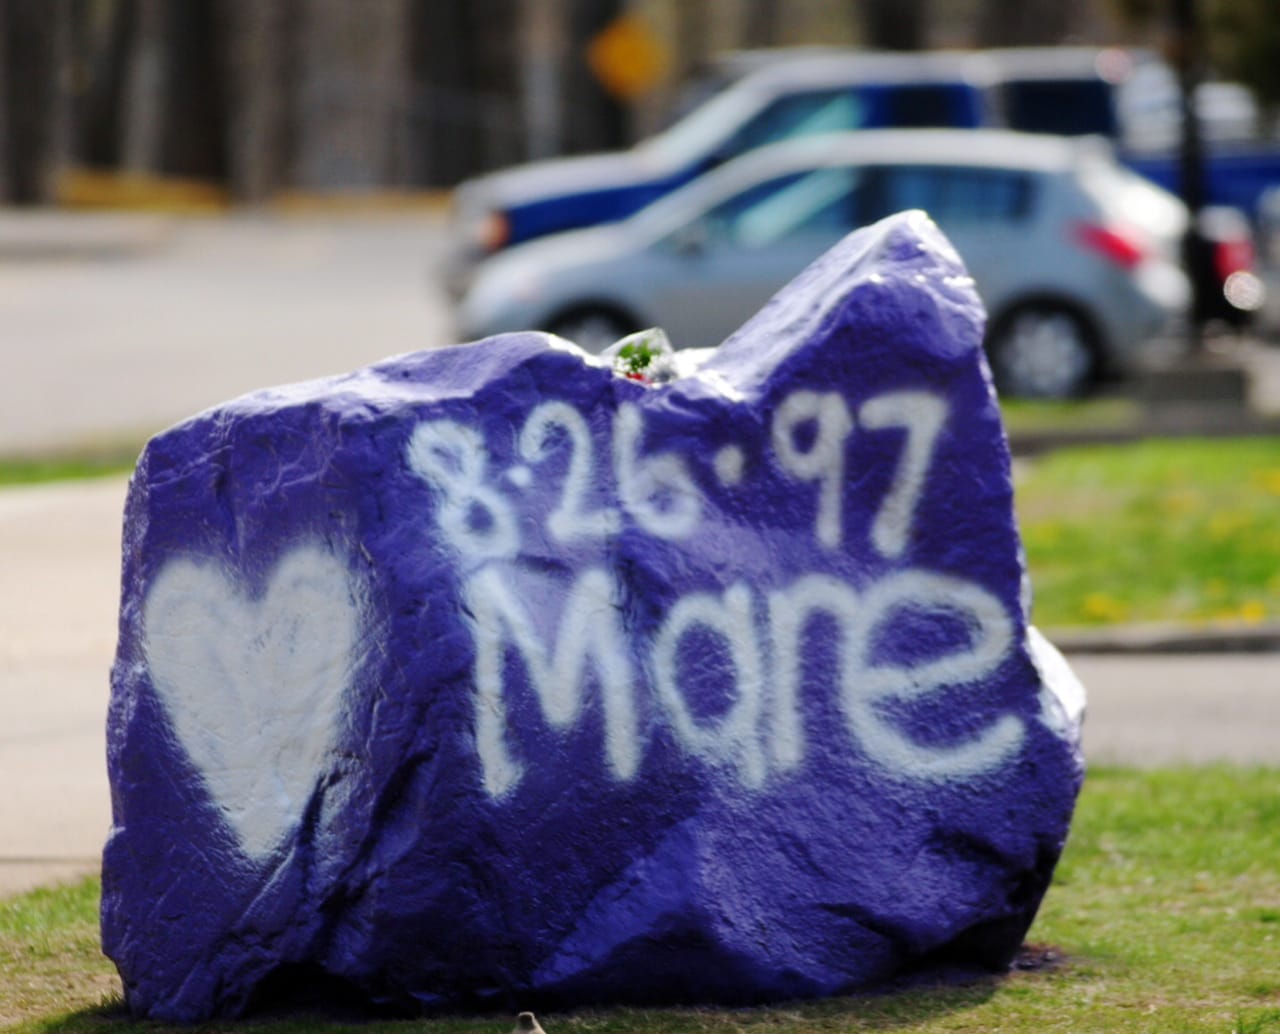 A rock spray-painted by students sits in memory of 16-year-old stabbing victim Maren Sanchez on Friday sits outside Jonathan Law High School in Milford, Conn.